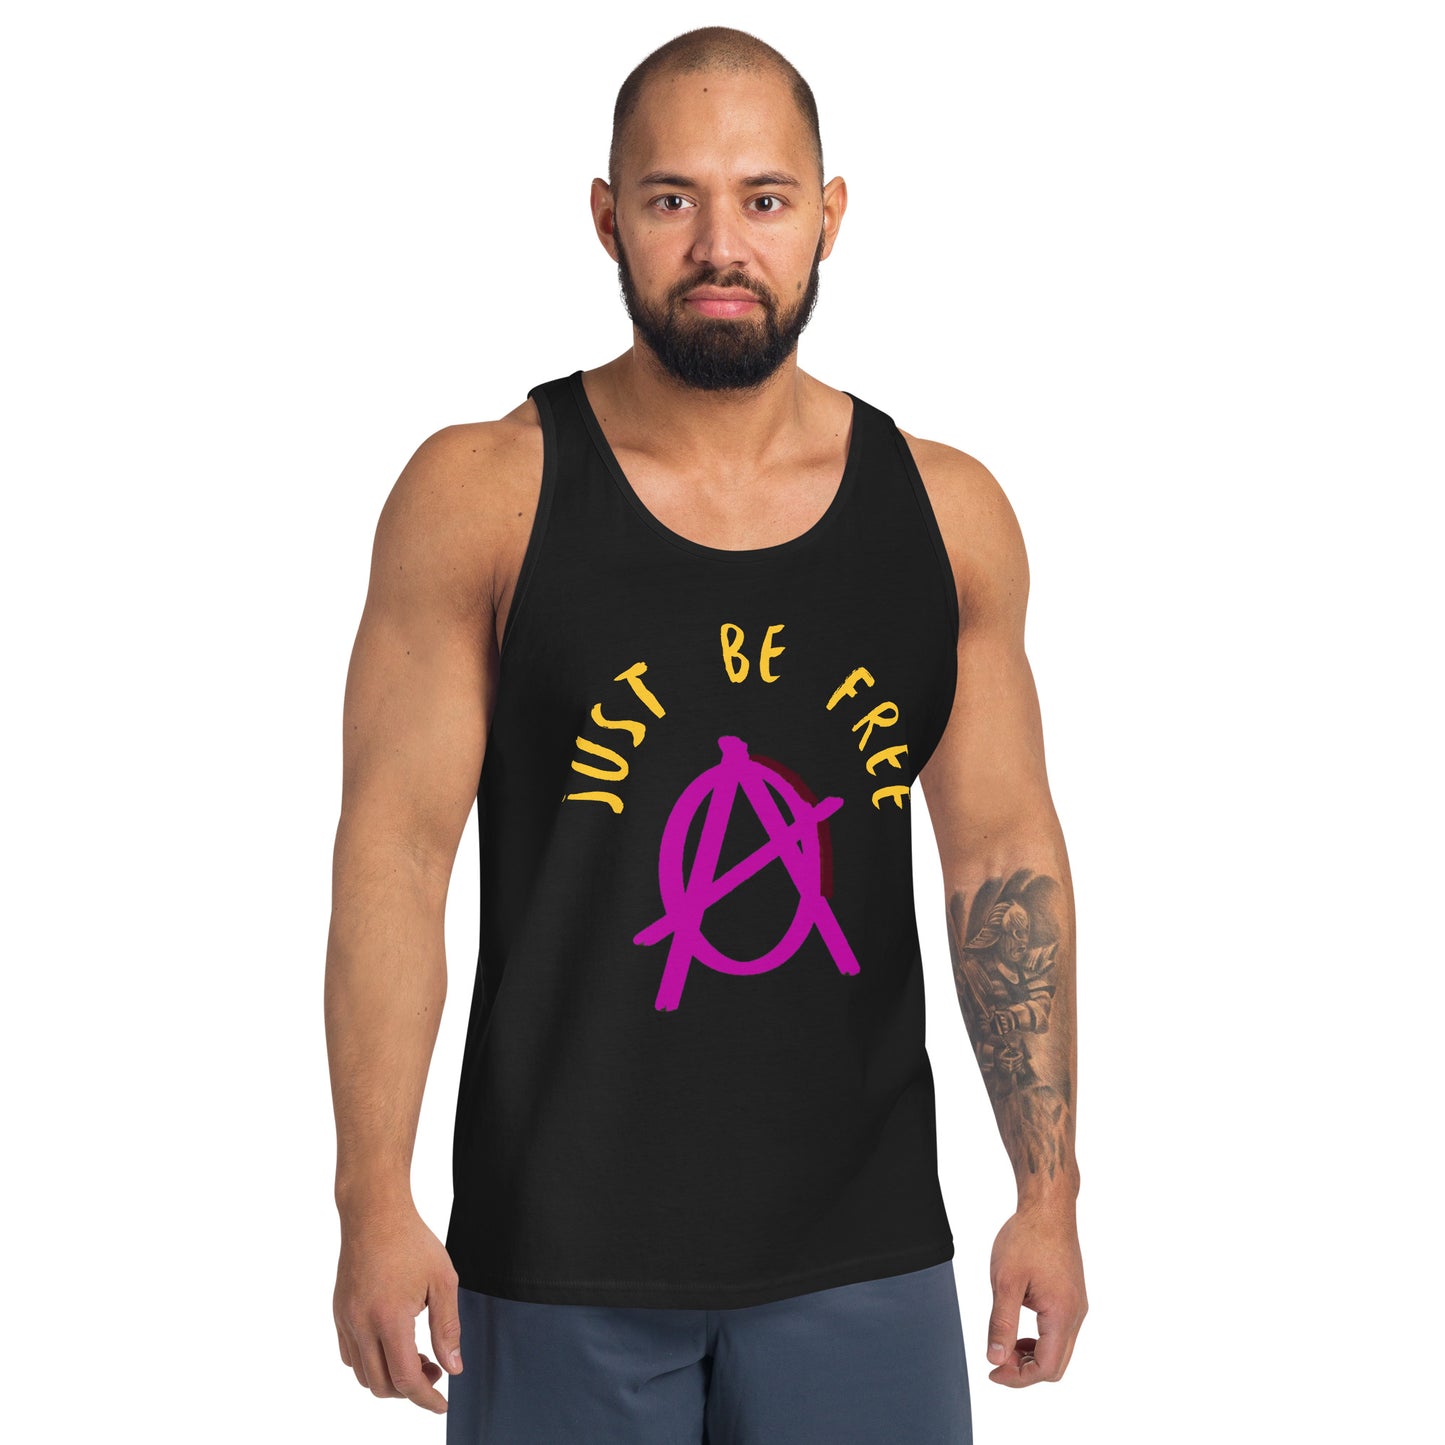 Anarchy Wear "Just Be Free" Pink Unisex Tank Top